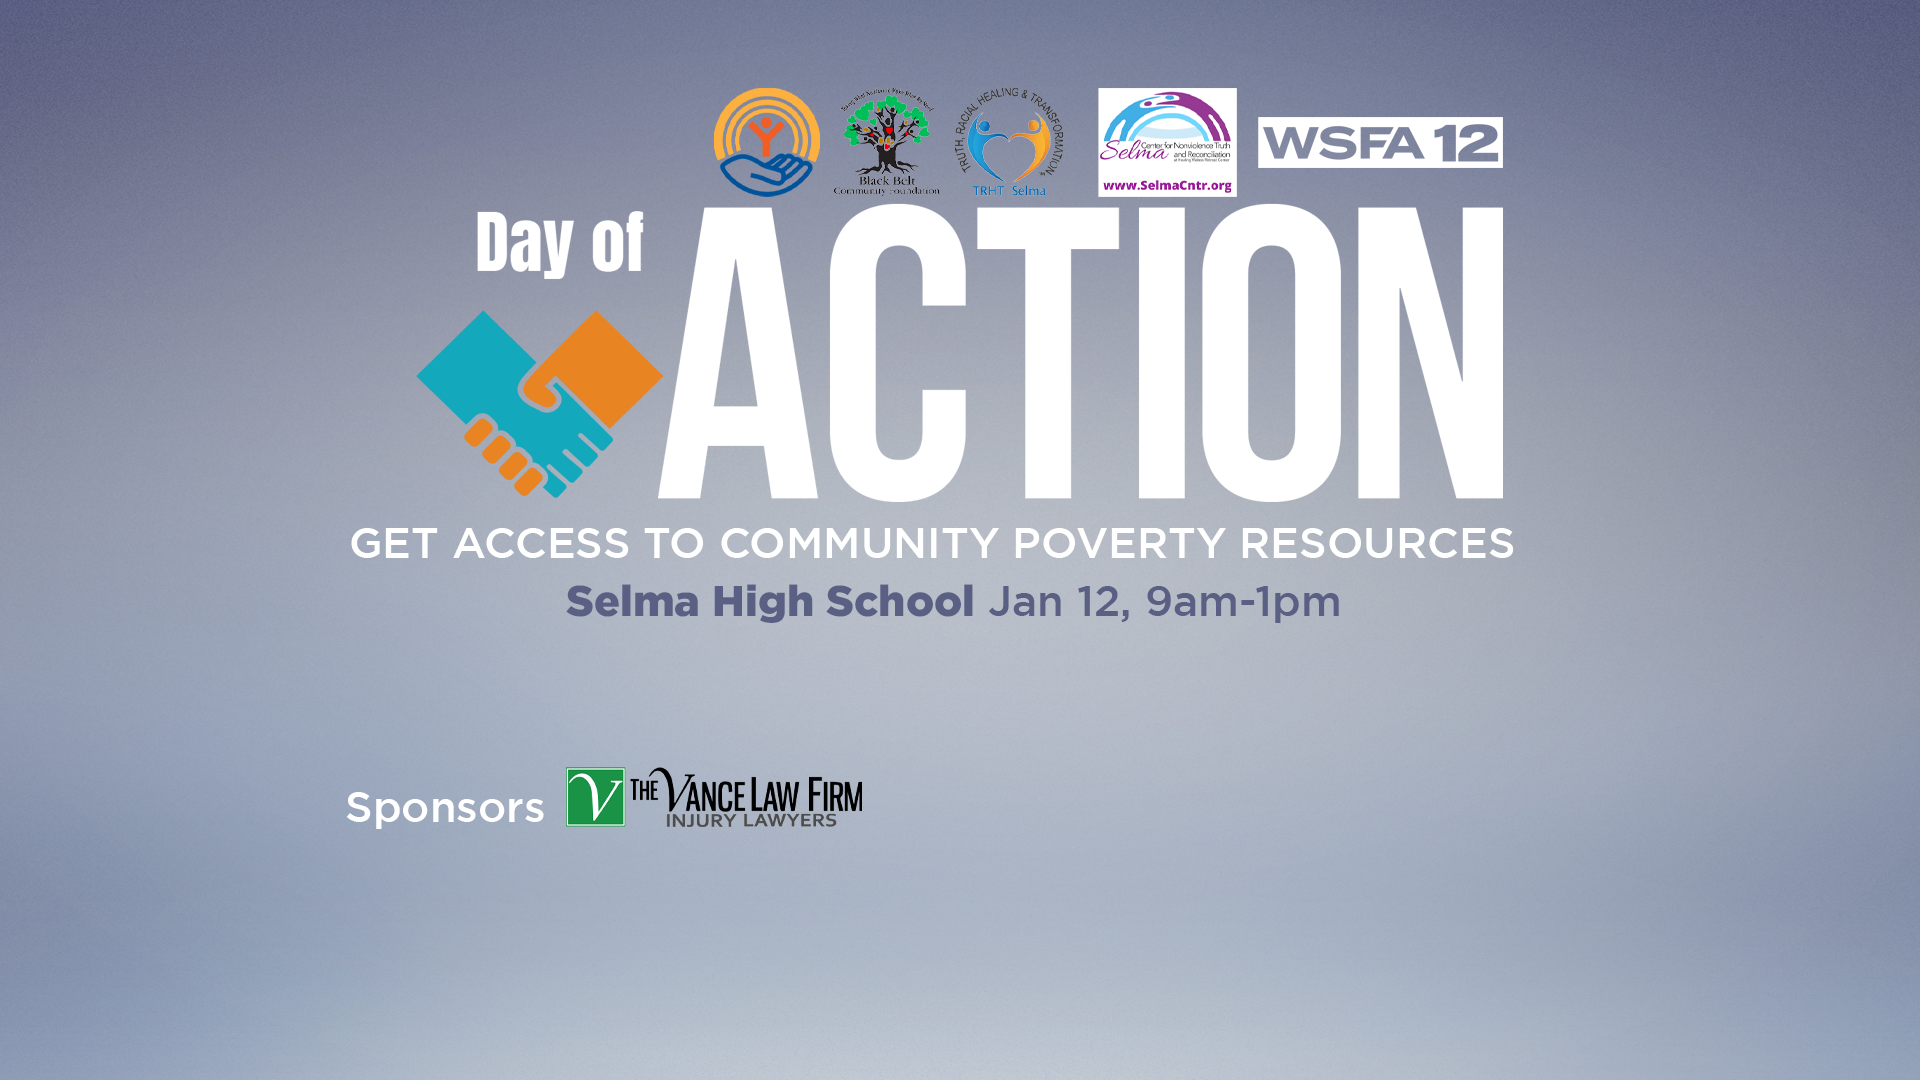 WSFA TV 12 is organizing a day of action (January 12, 2024) to assist low-income Dallas County residents. It will coincide with the anniversary of the 2023 Selma tornado.